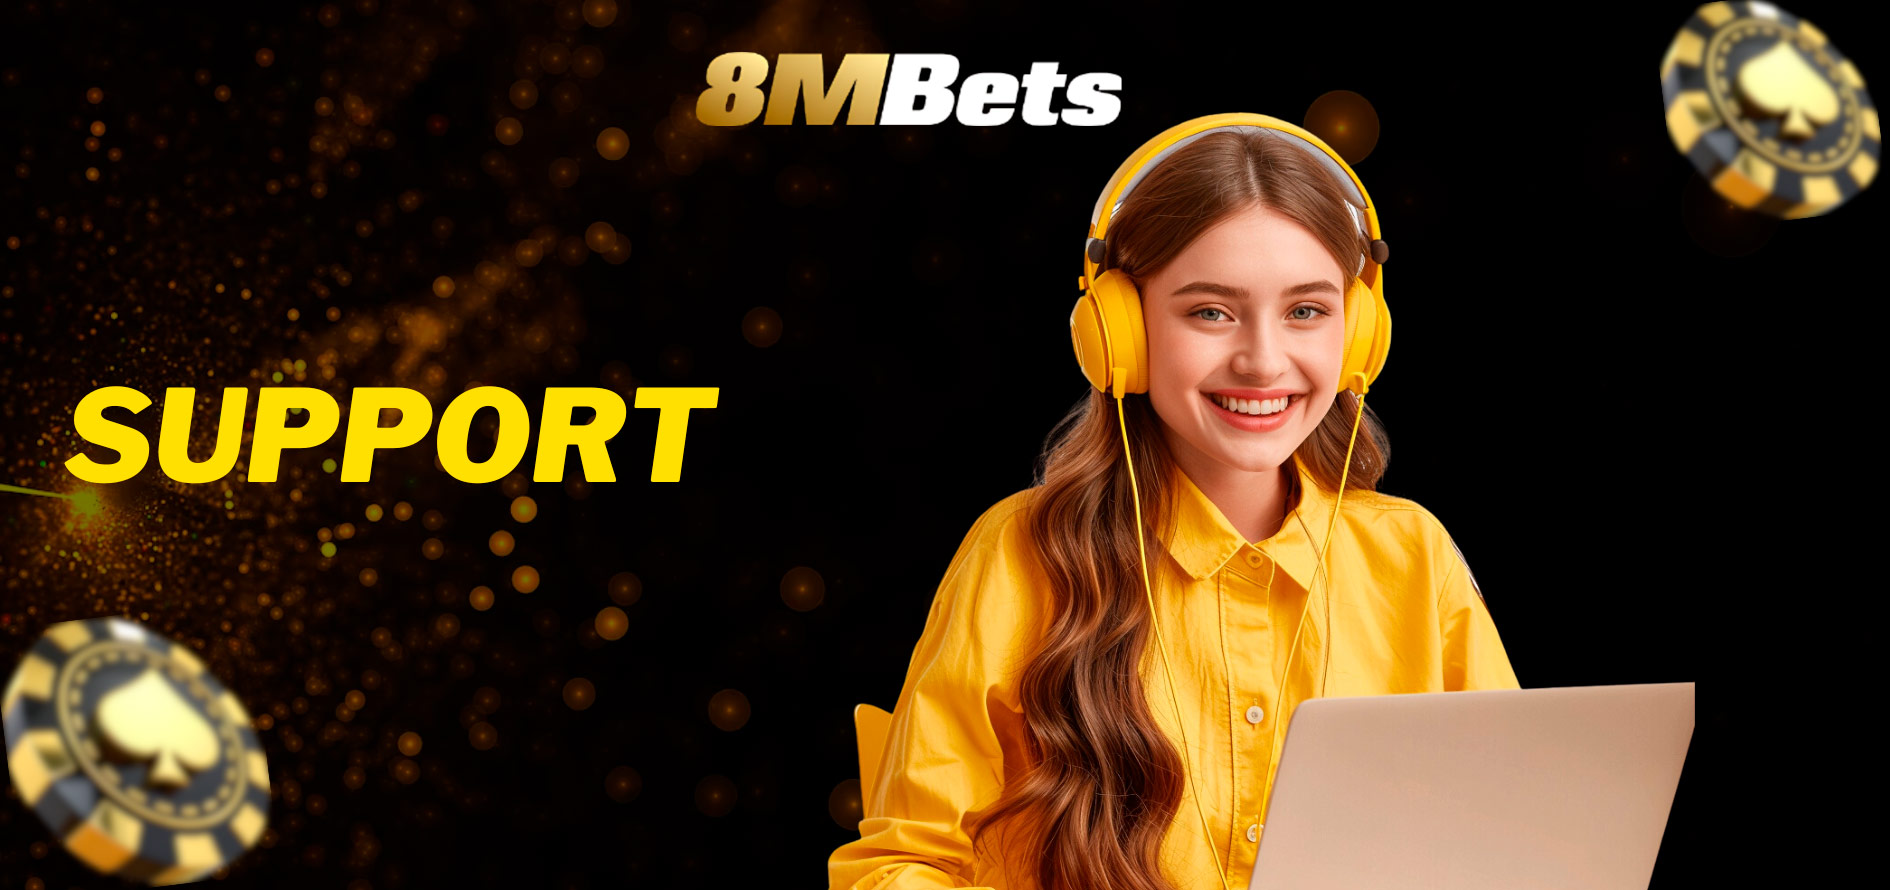 Get 24/7 Expert Support at 8MBets